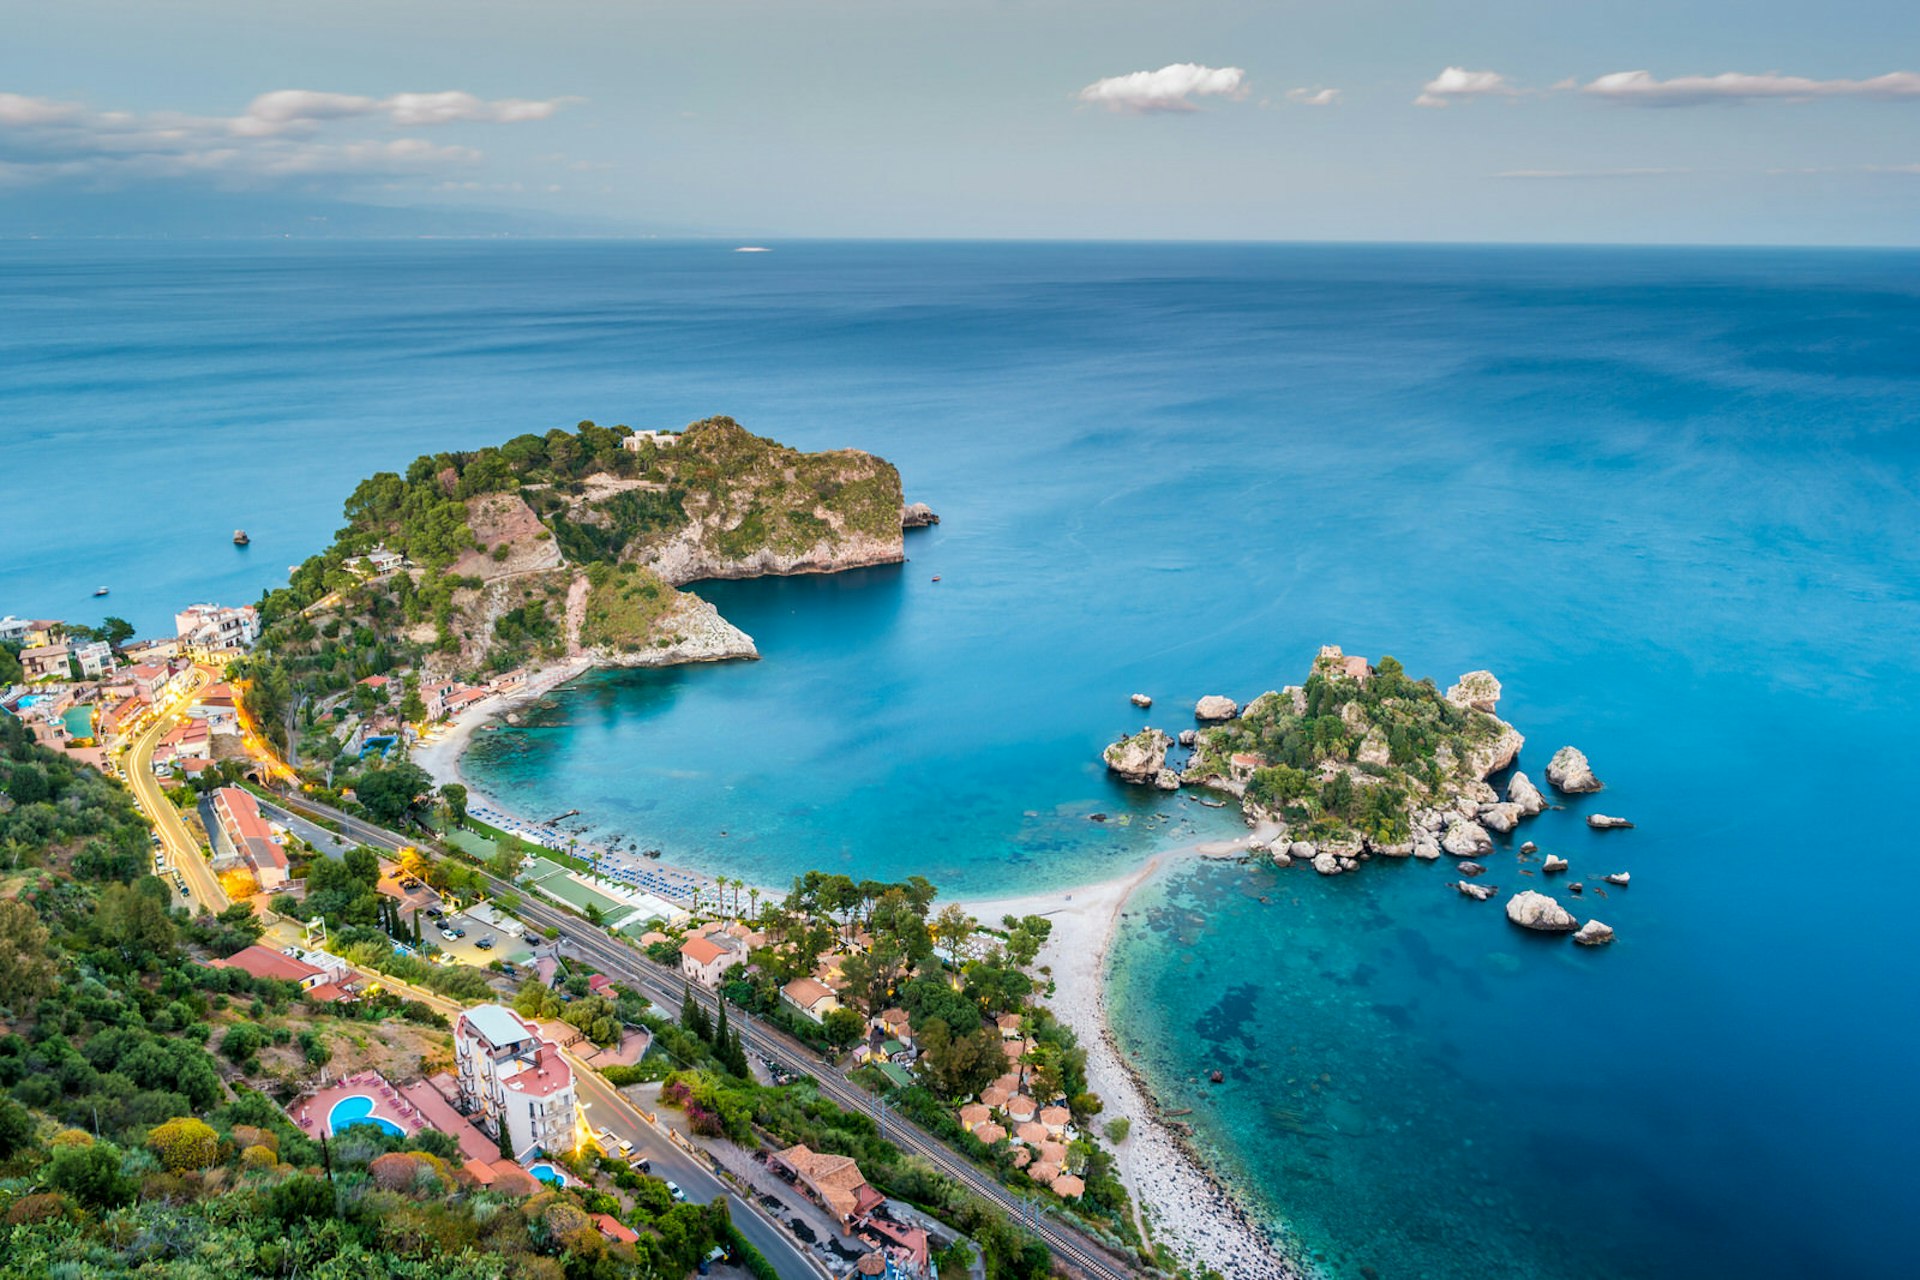 An aerial view of Isola Bella beach - a thin strip of white sand connecting the mainland to a small rocky island surrounded by shallow turquoise water.